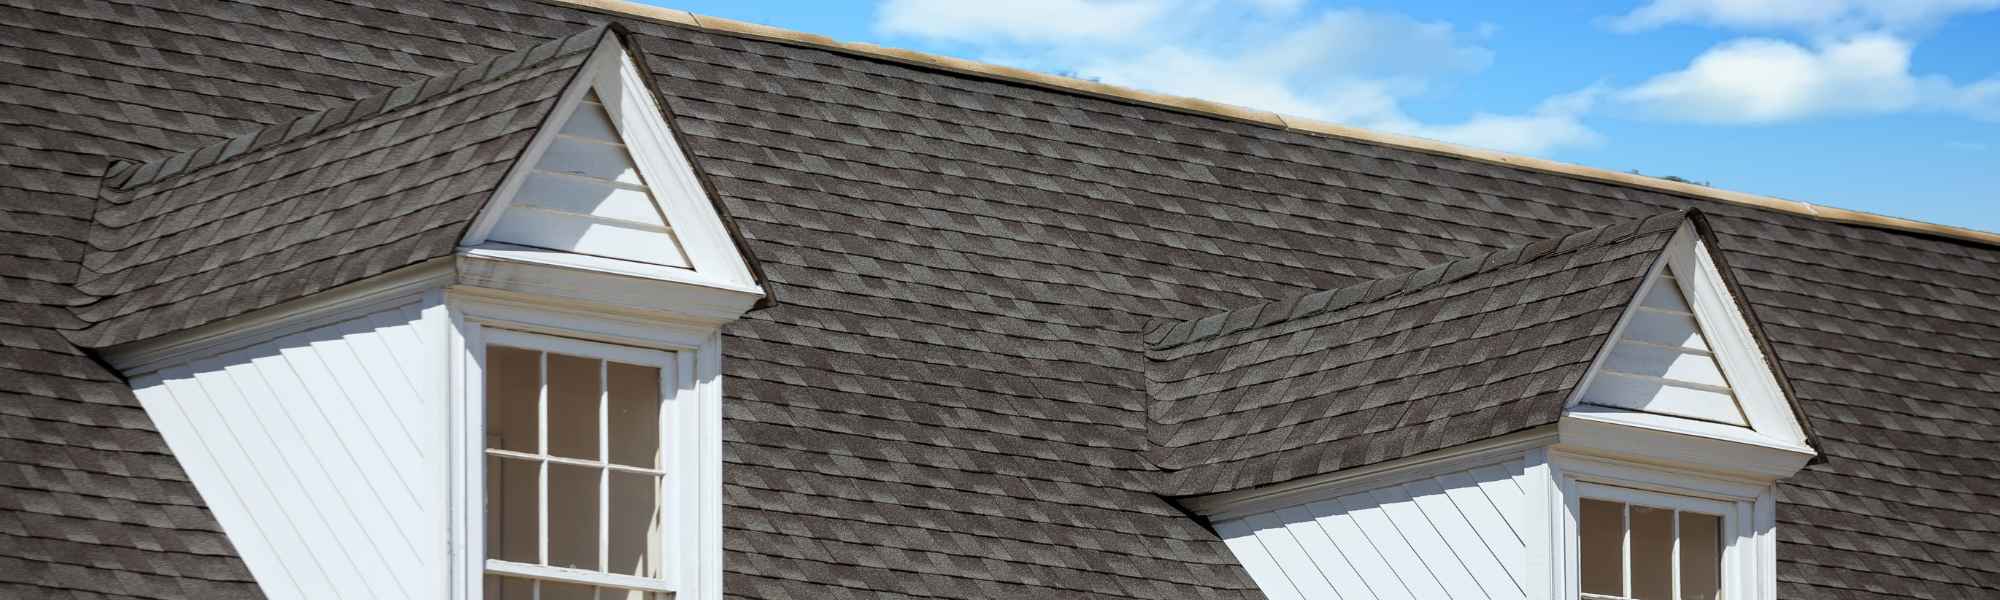 ideal roofing styles and materials that can withstand the Gulf Coast climate - best roofing company - metal roof contractor - roofer - leading residential and commercial roof repair companies - Pensacola, Panama City, Destin, Port Charlotte, Fort Myers, Sarasota, Punta Gorda, Navarre, Milton, Gulf Breeze, Mary Esther, Lynn Haven